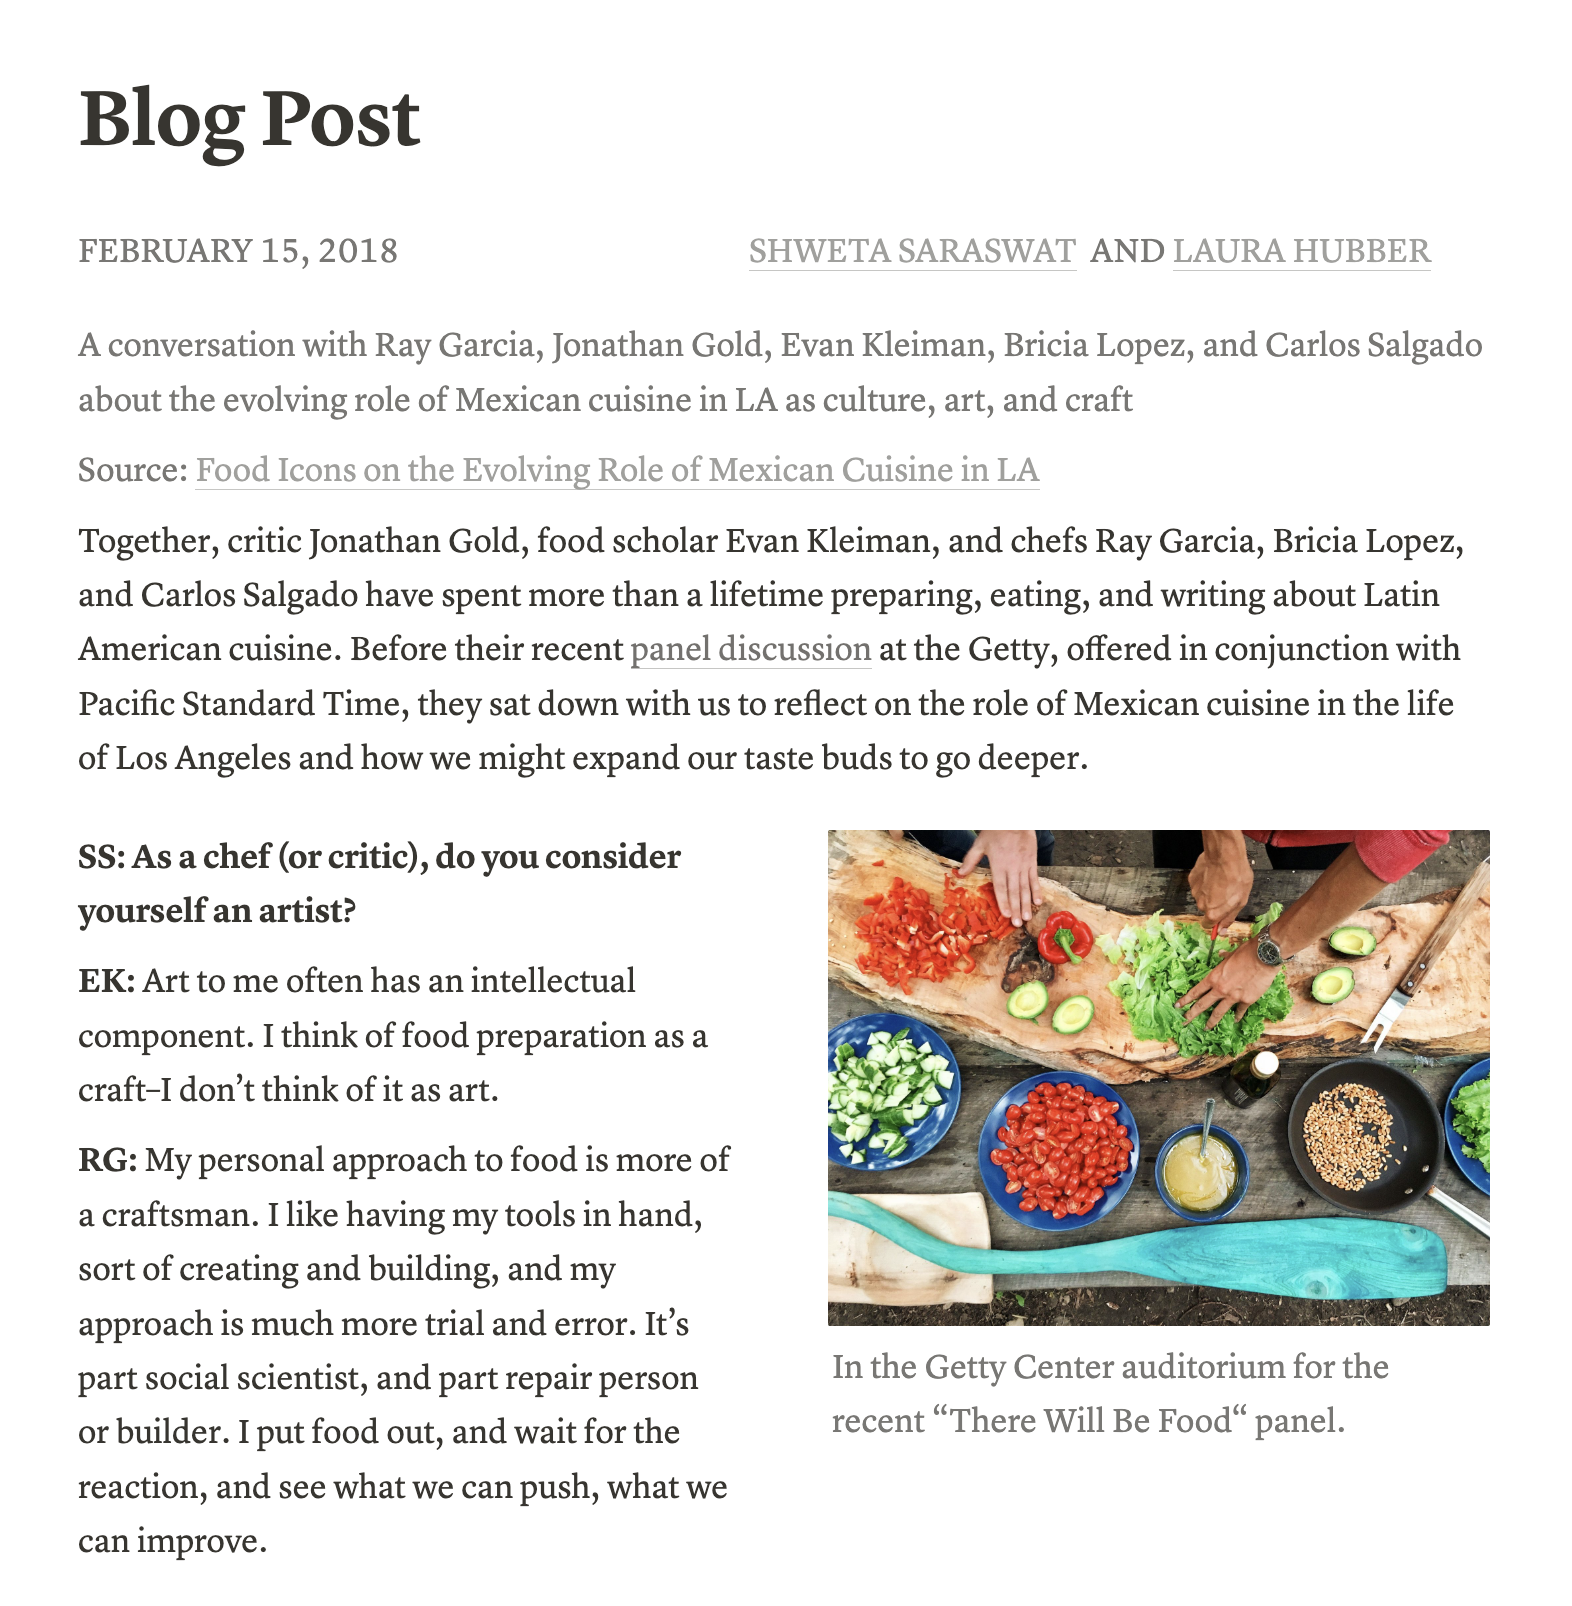 Notion's blog template is an easy to follow guide to start blogging.